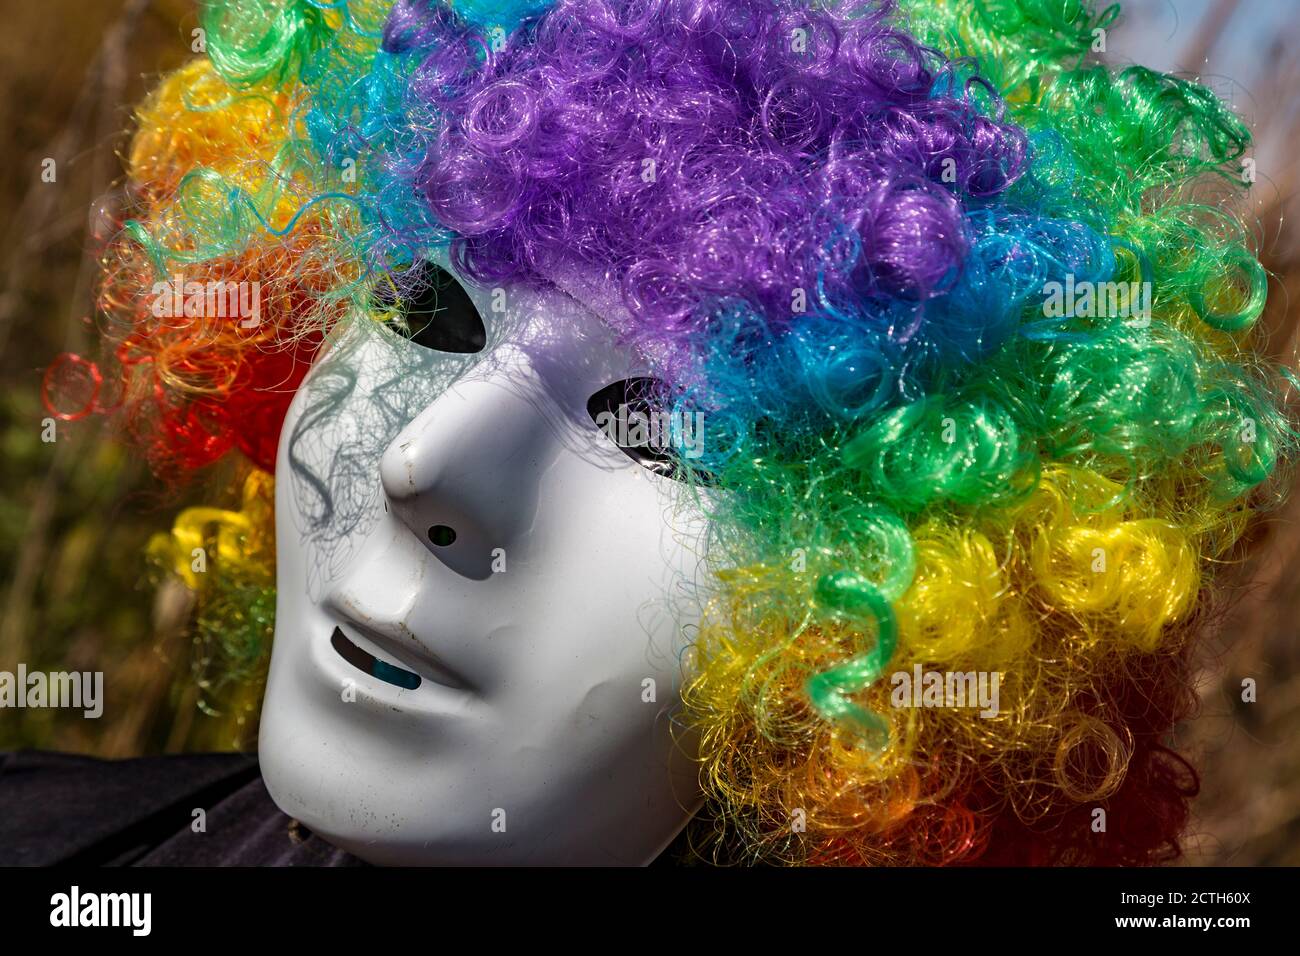 Halloween mask and colorful wig Stock Photo